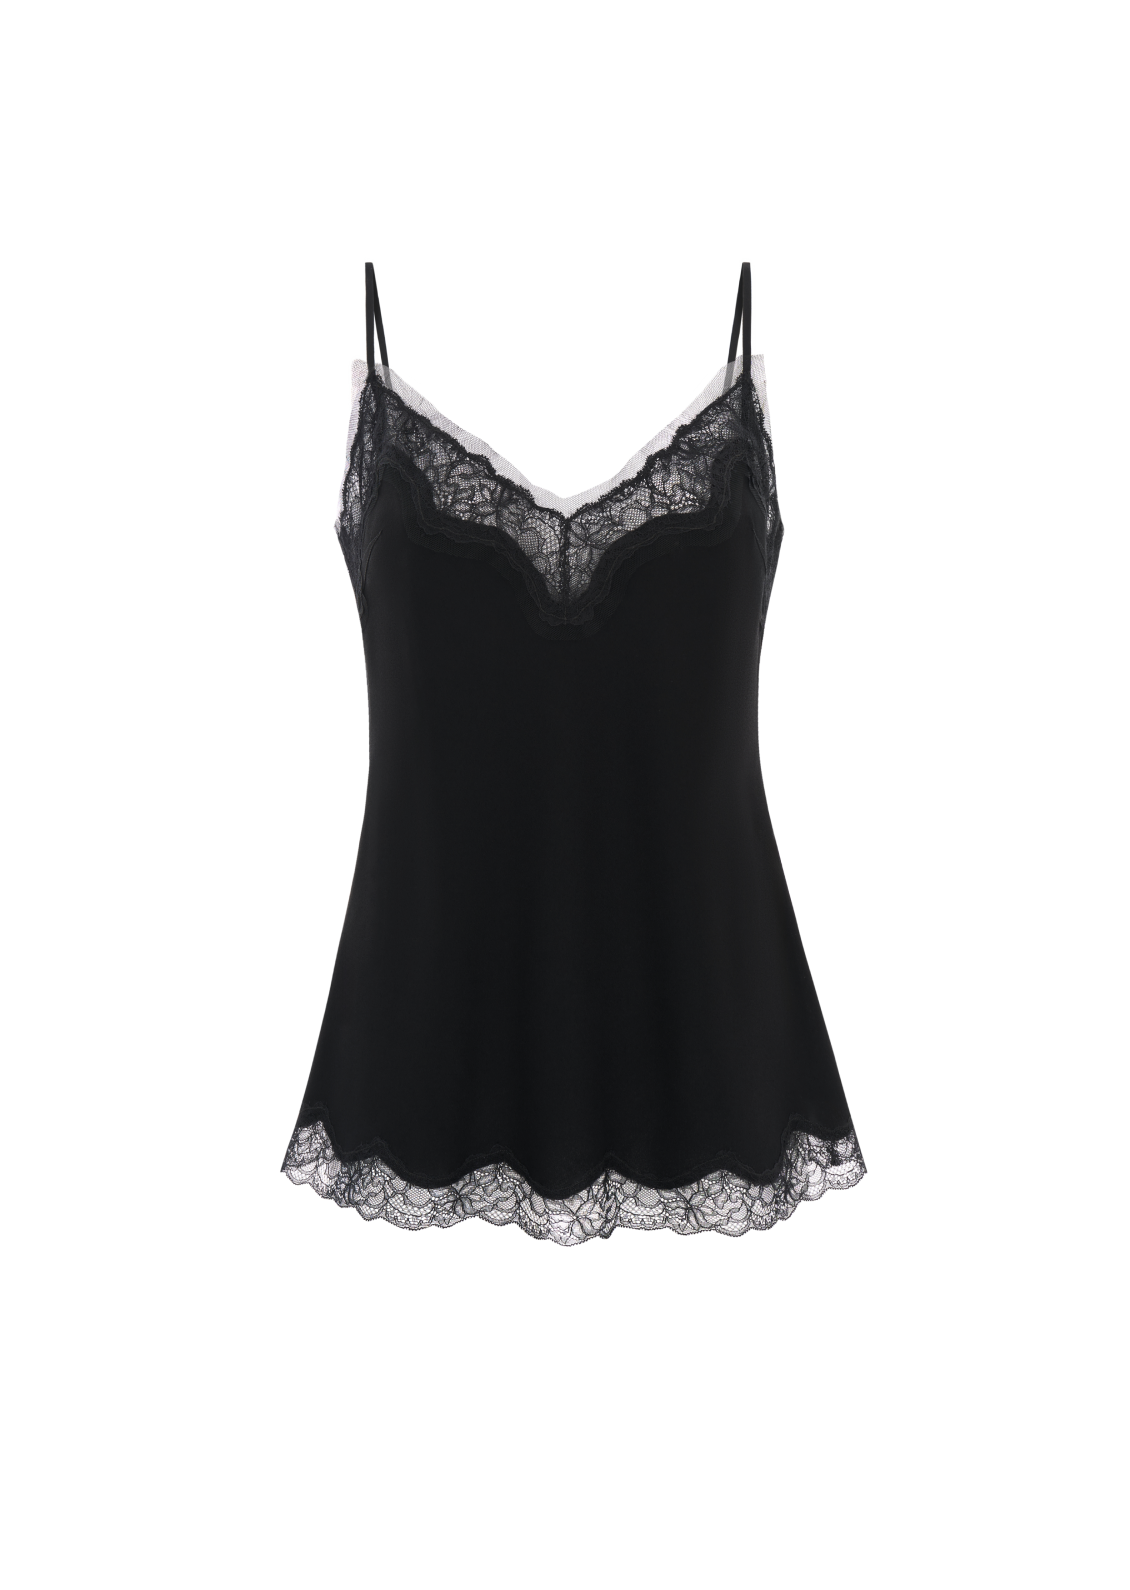 Lace top in black